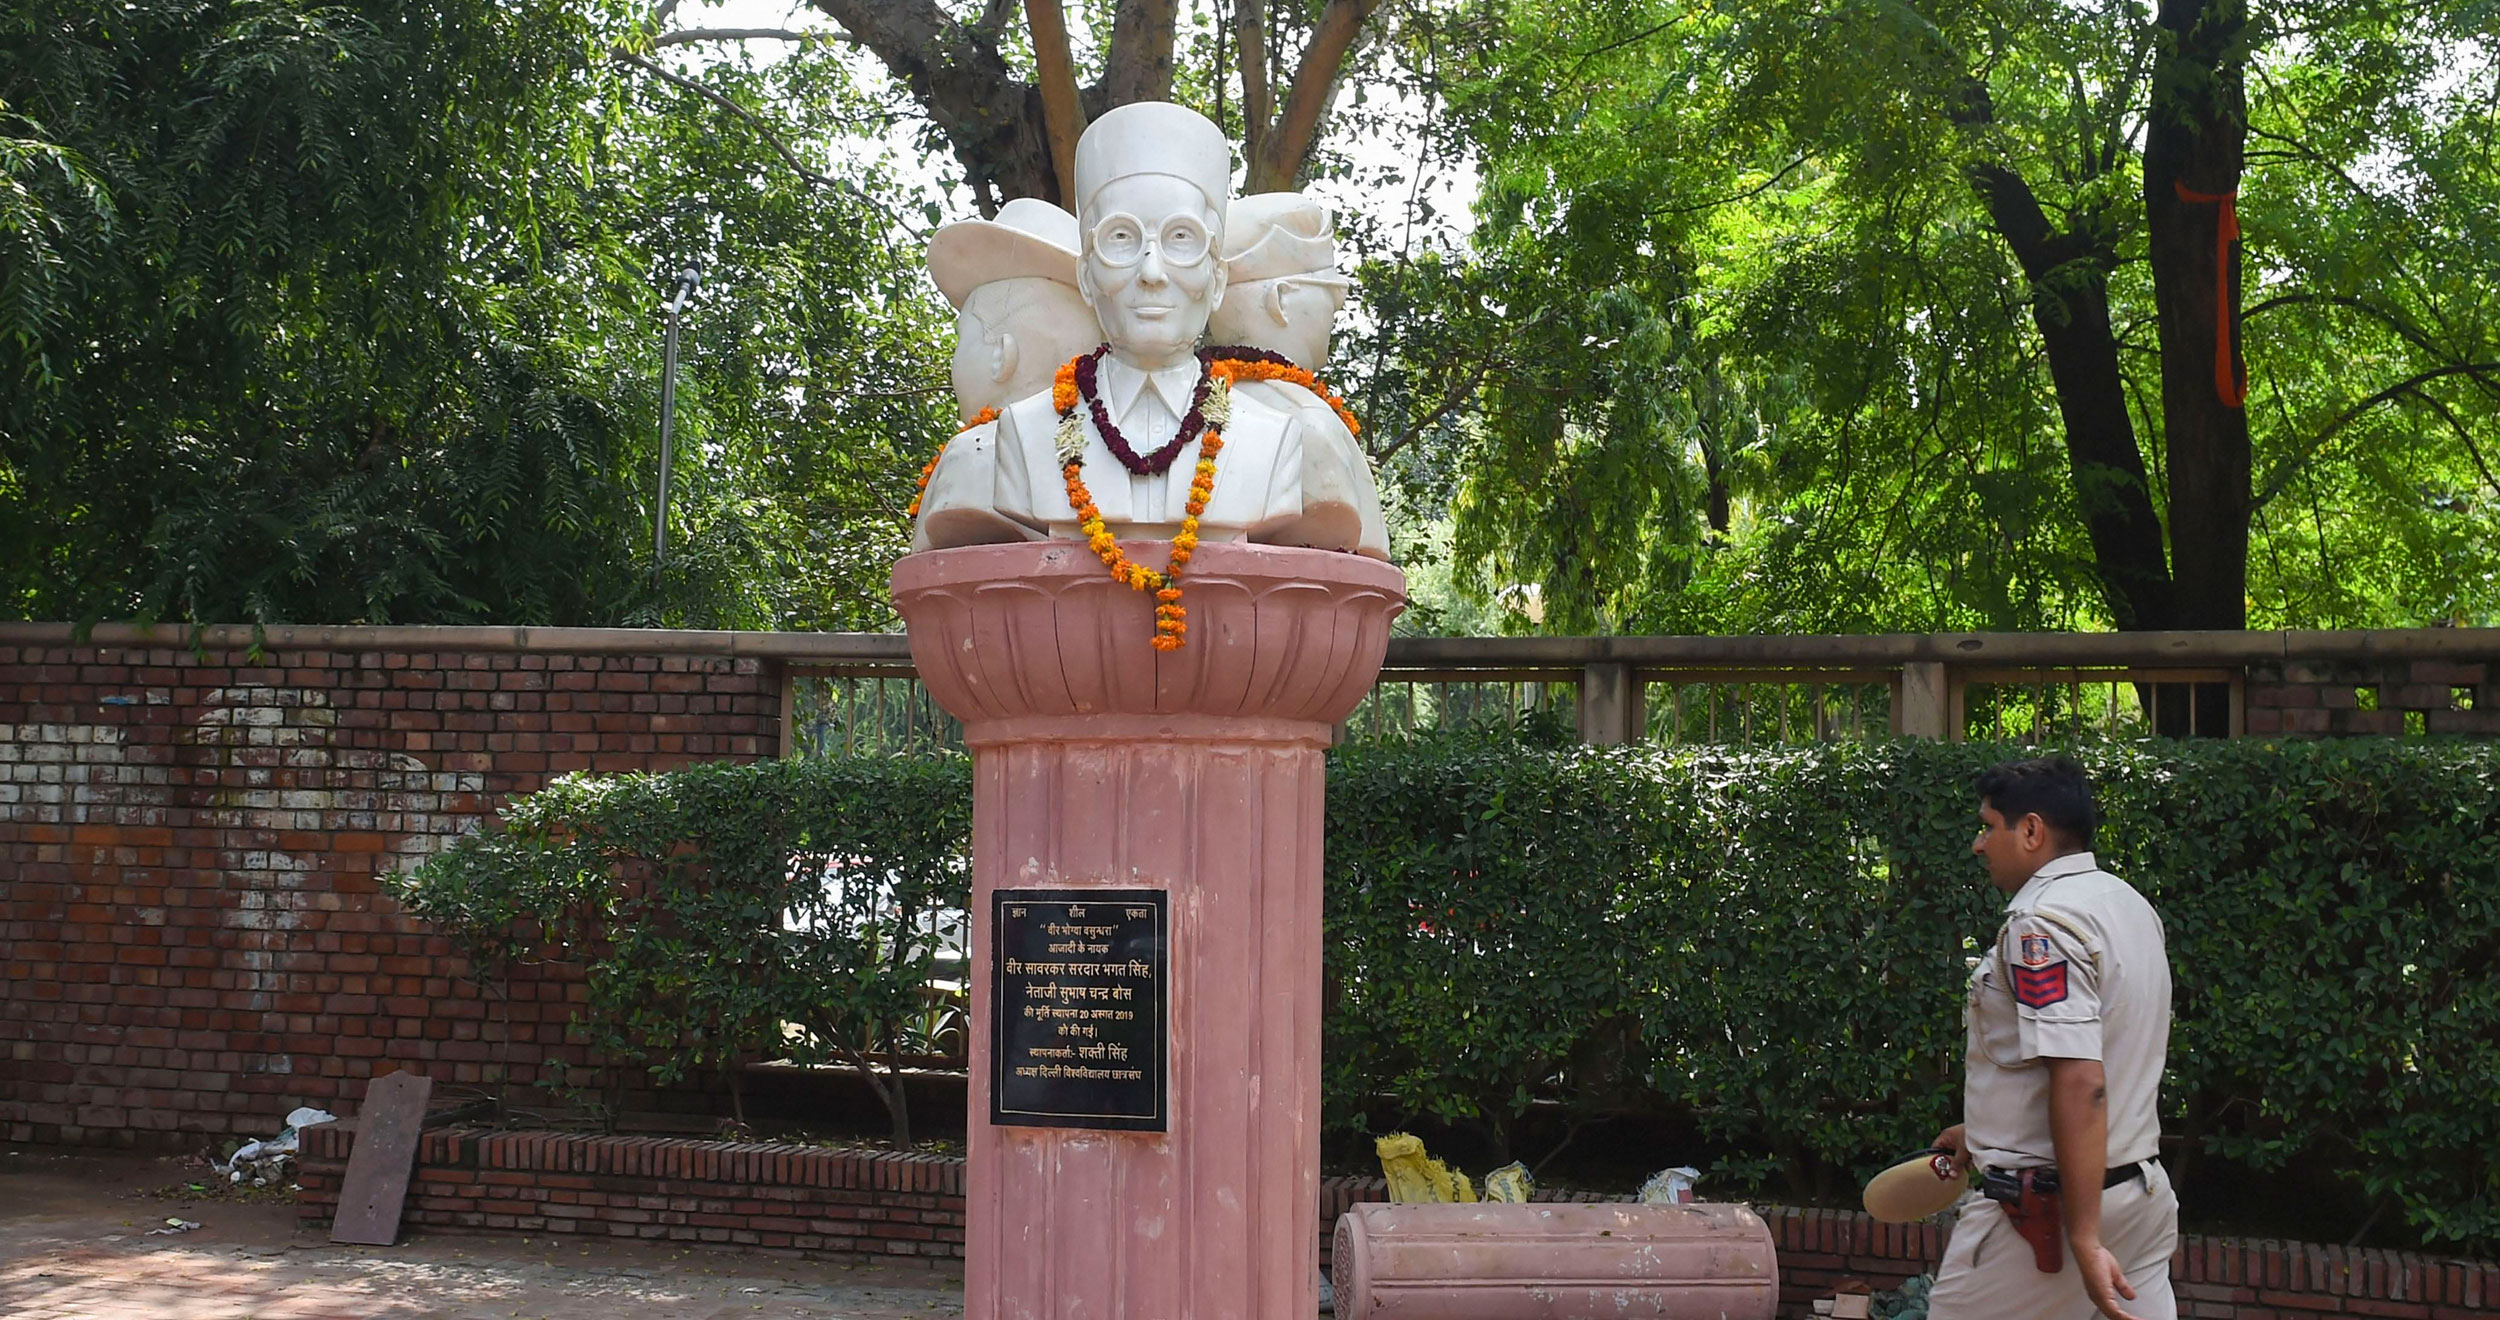 A policeman walks past the busts of Veer Savarkar, Subhash Chandra Bose and Bhagat Singh installed outside the Arts Faculty of Delhi University, in New Delhi, on August 21, 2019. 